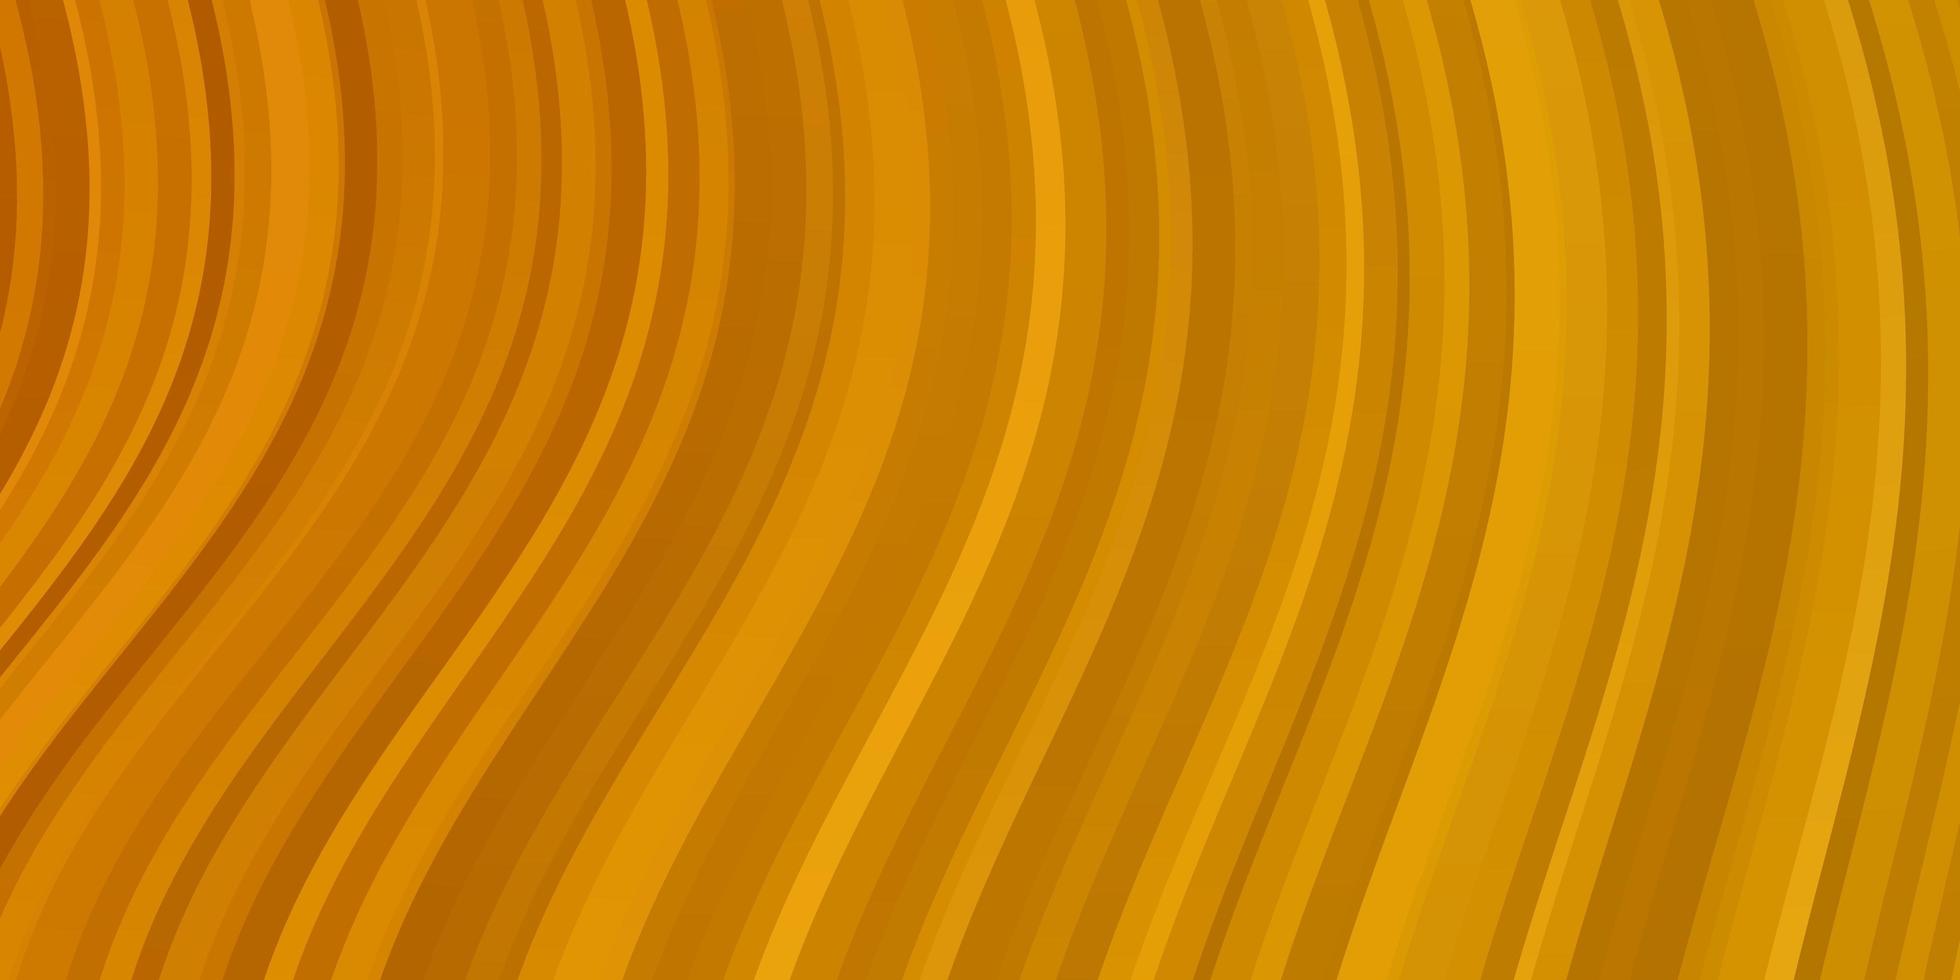 Light Orange vector background with bent lines. Abstract gradient illustration with wry lines. Best design for your posters, banners.